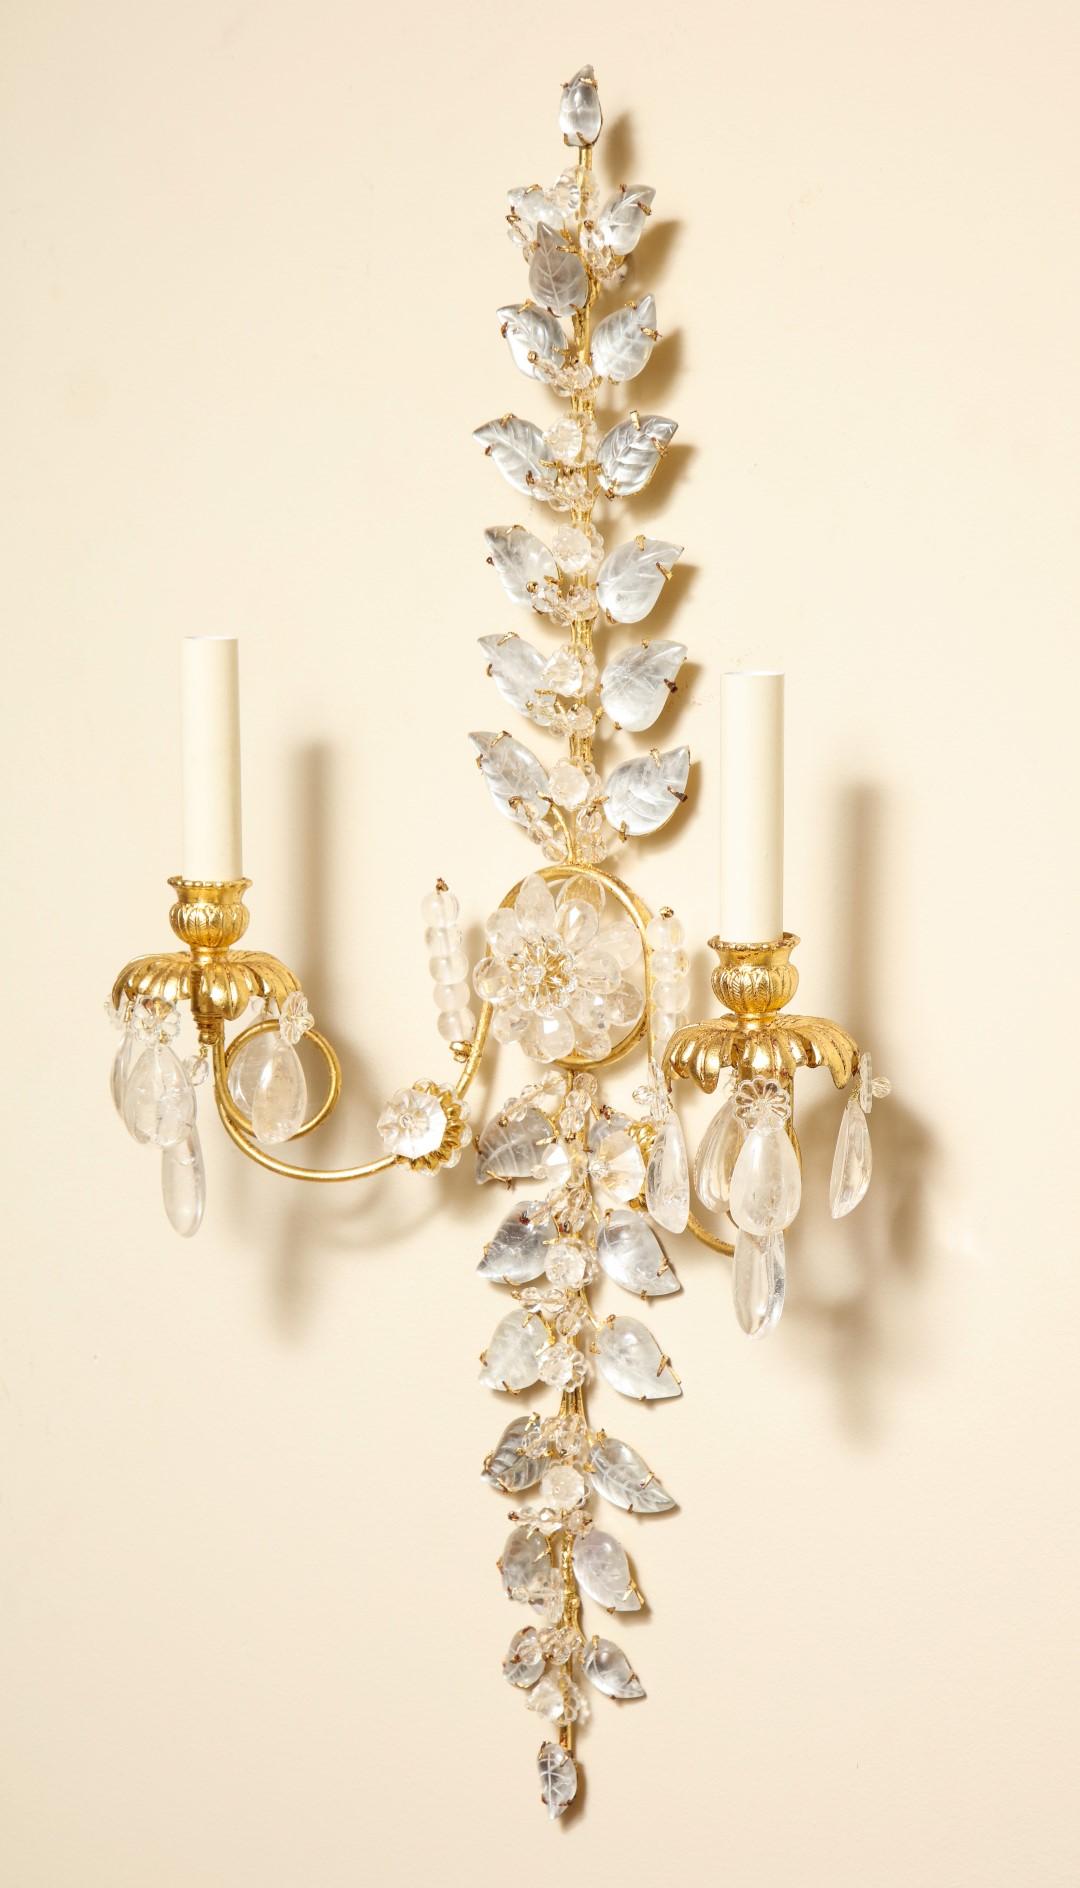 Chinoiserie Pair of Laurel Branch Rock Crystal Sconces